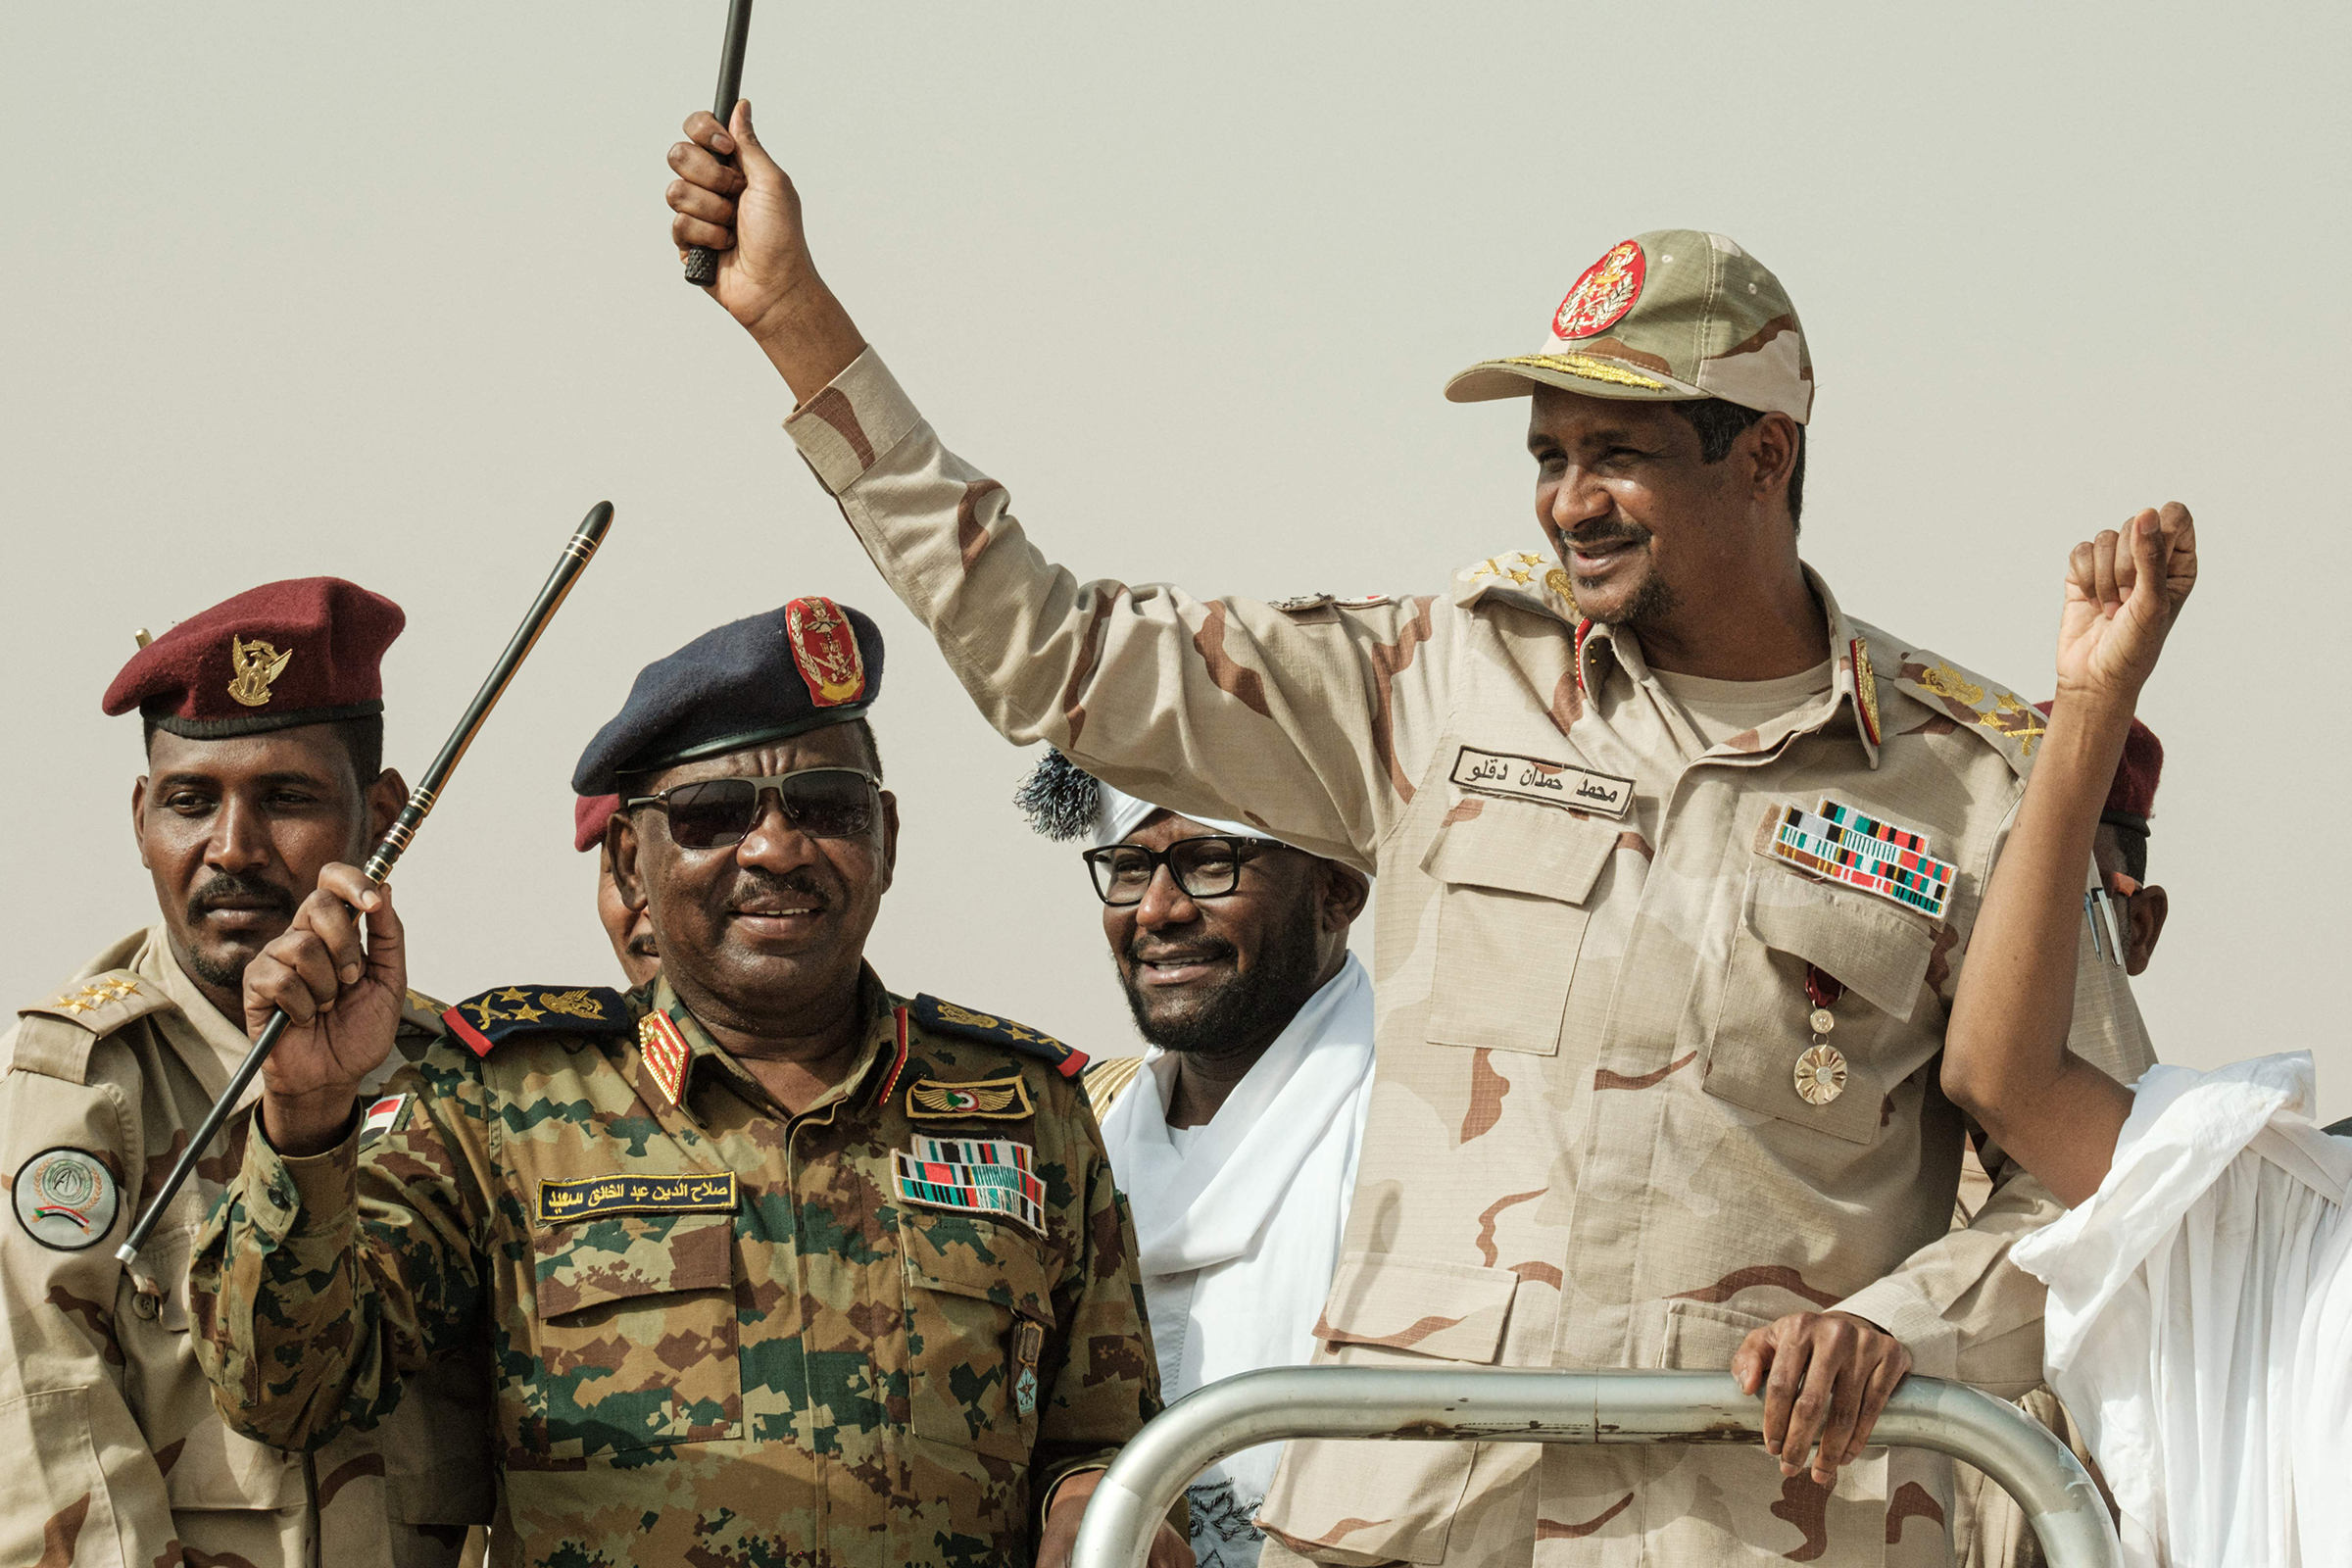 What can the United States do to help Sudan